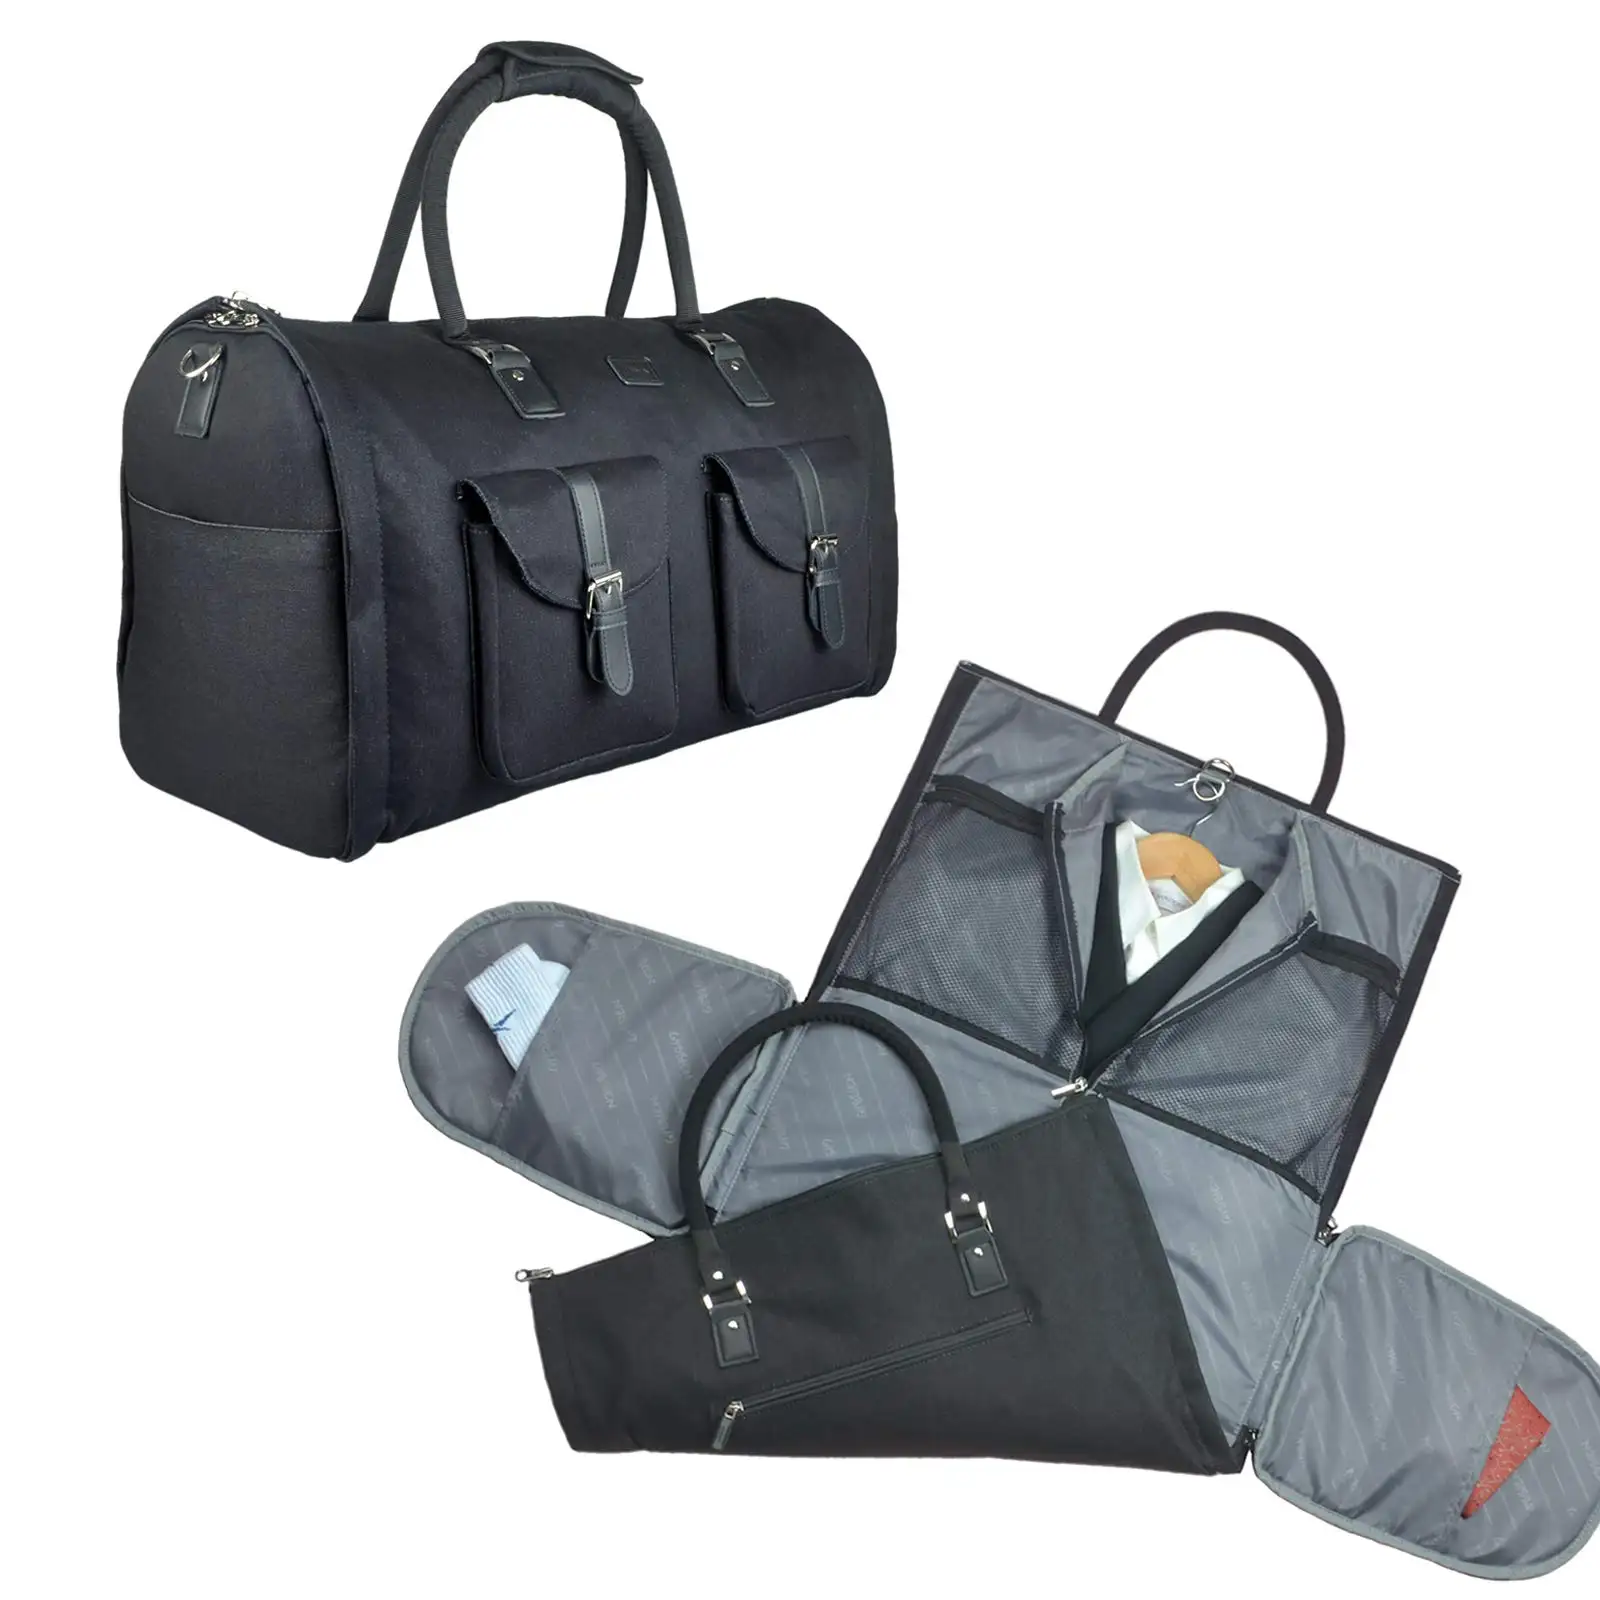 Wholesale latest design Dust-proof 2 in 1 Convertible Travel Garment Bag Carry On Suit Bag Luggage Duffel Bag